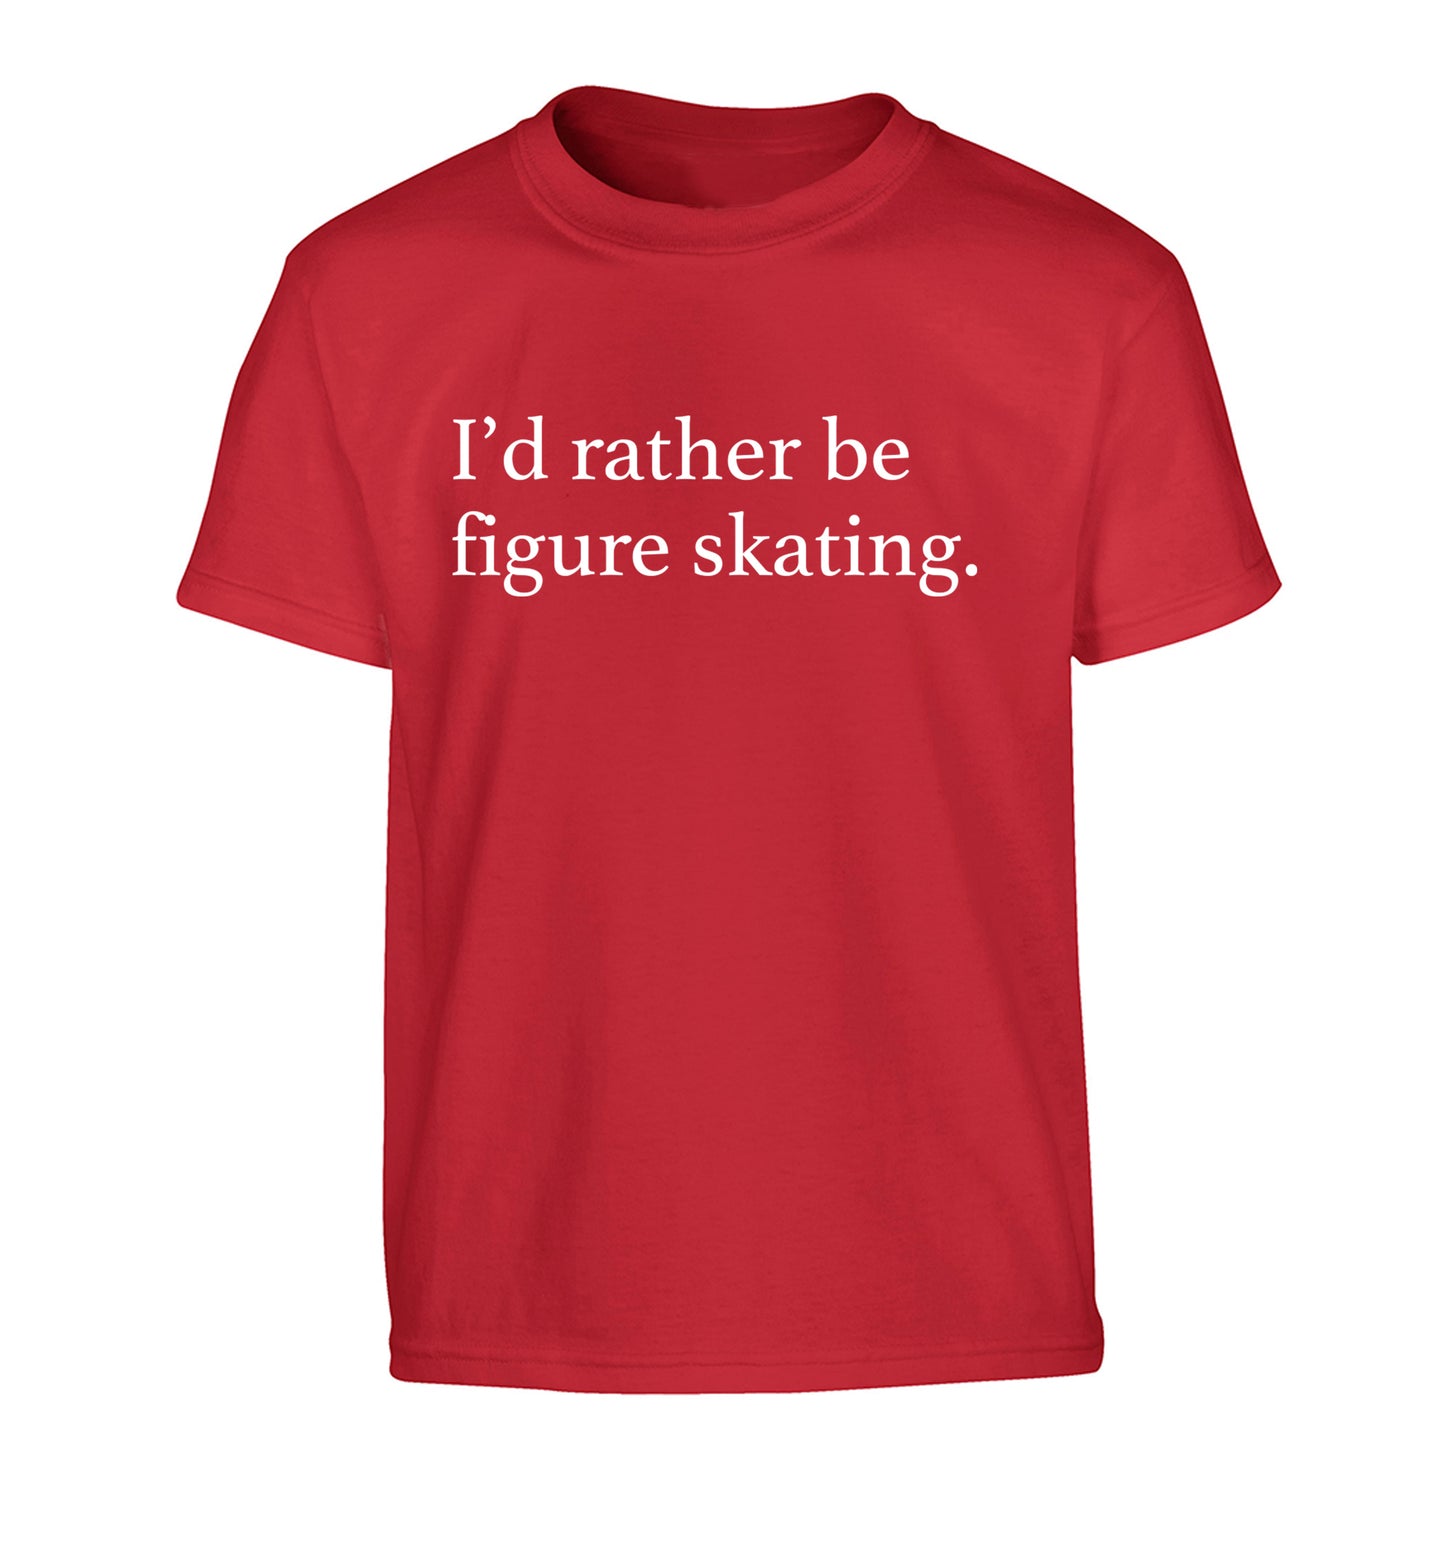 I'd rather be figure skating Children's red Tshirt 12-14 Years